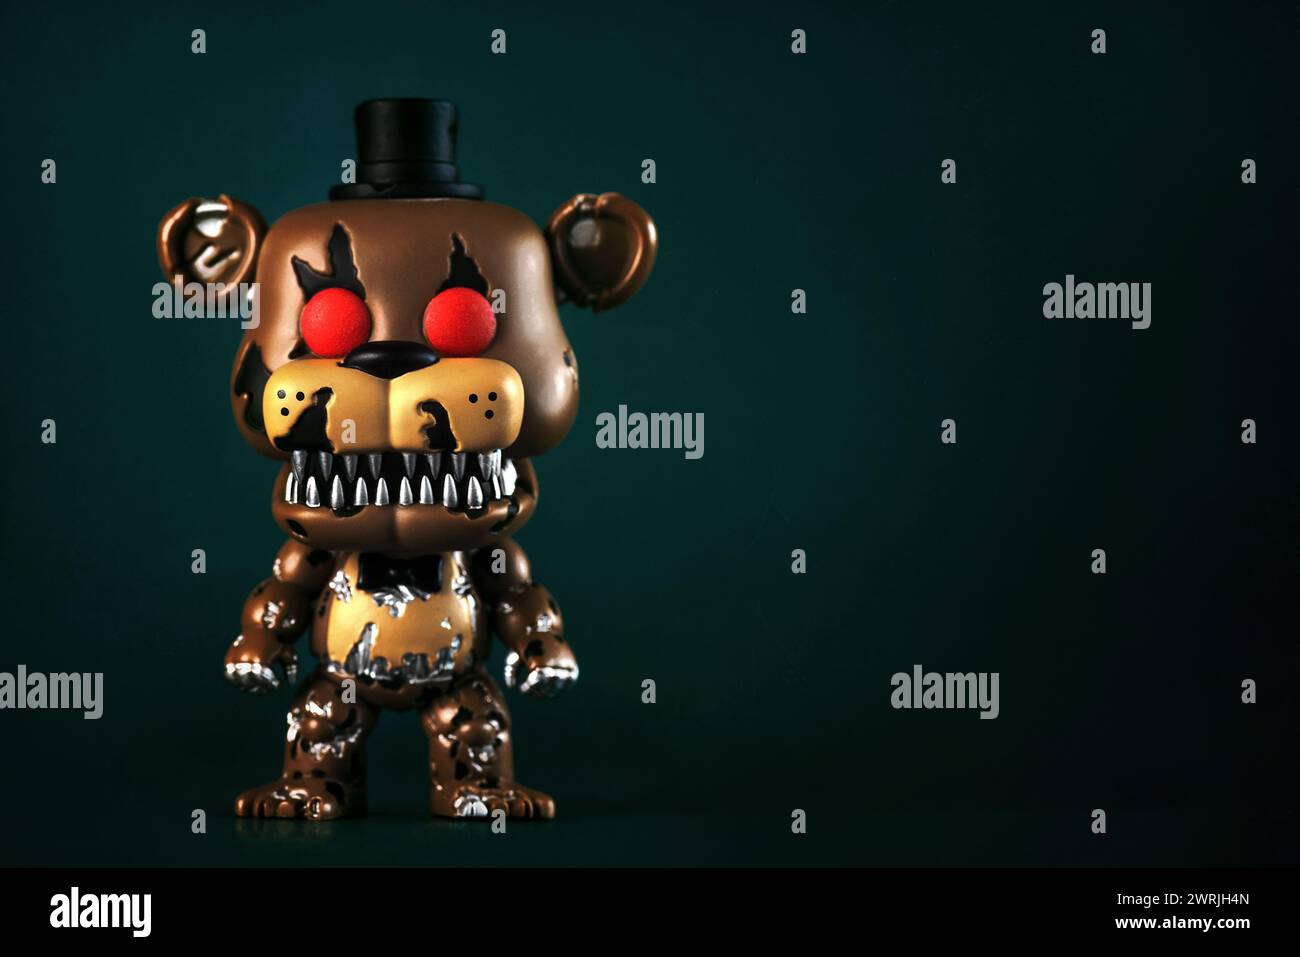 Funko POP vinyl figure of Nightmare Freddy character of the videogames,movies and books Five Nights at Freddy's over green background. Illustrative ed Stock Photo